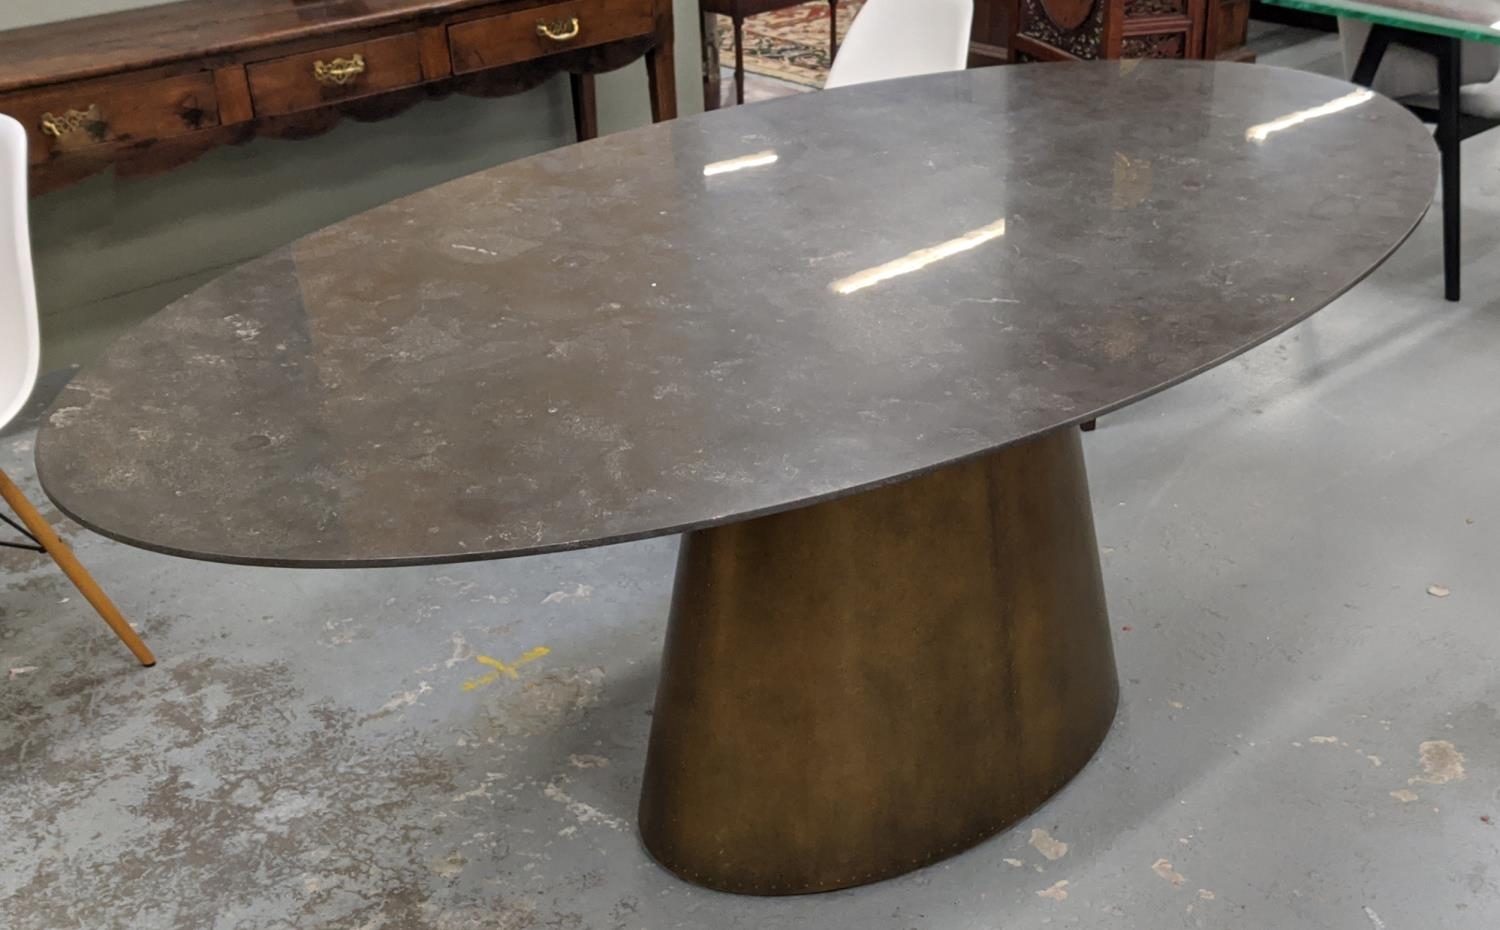 BARKER AND STONEHOUSE JANCO OVAL DINING TABLE, 200cm x 110cm x 76cm.